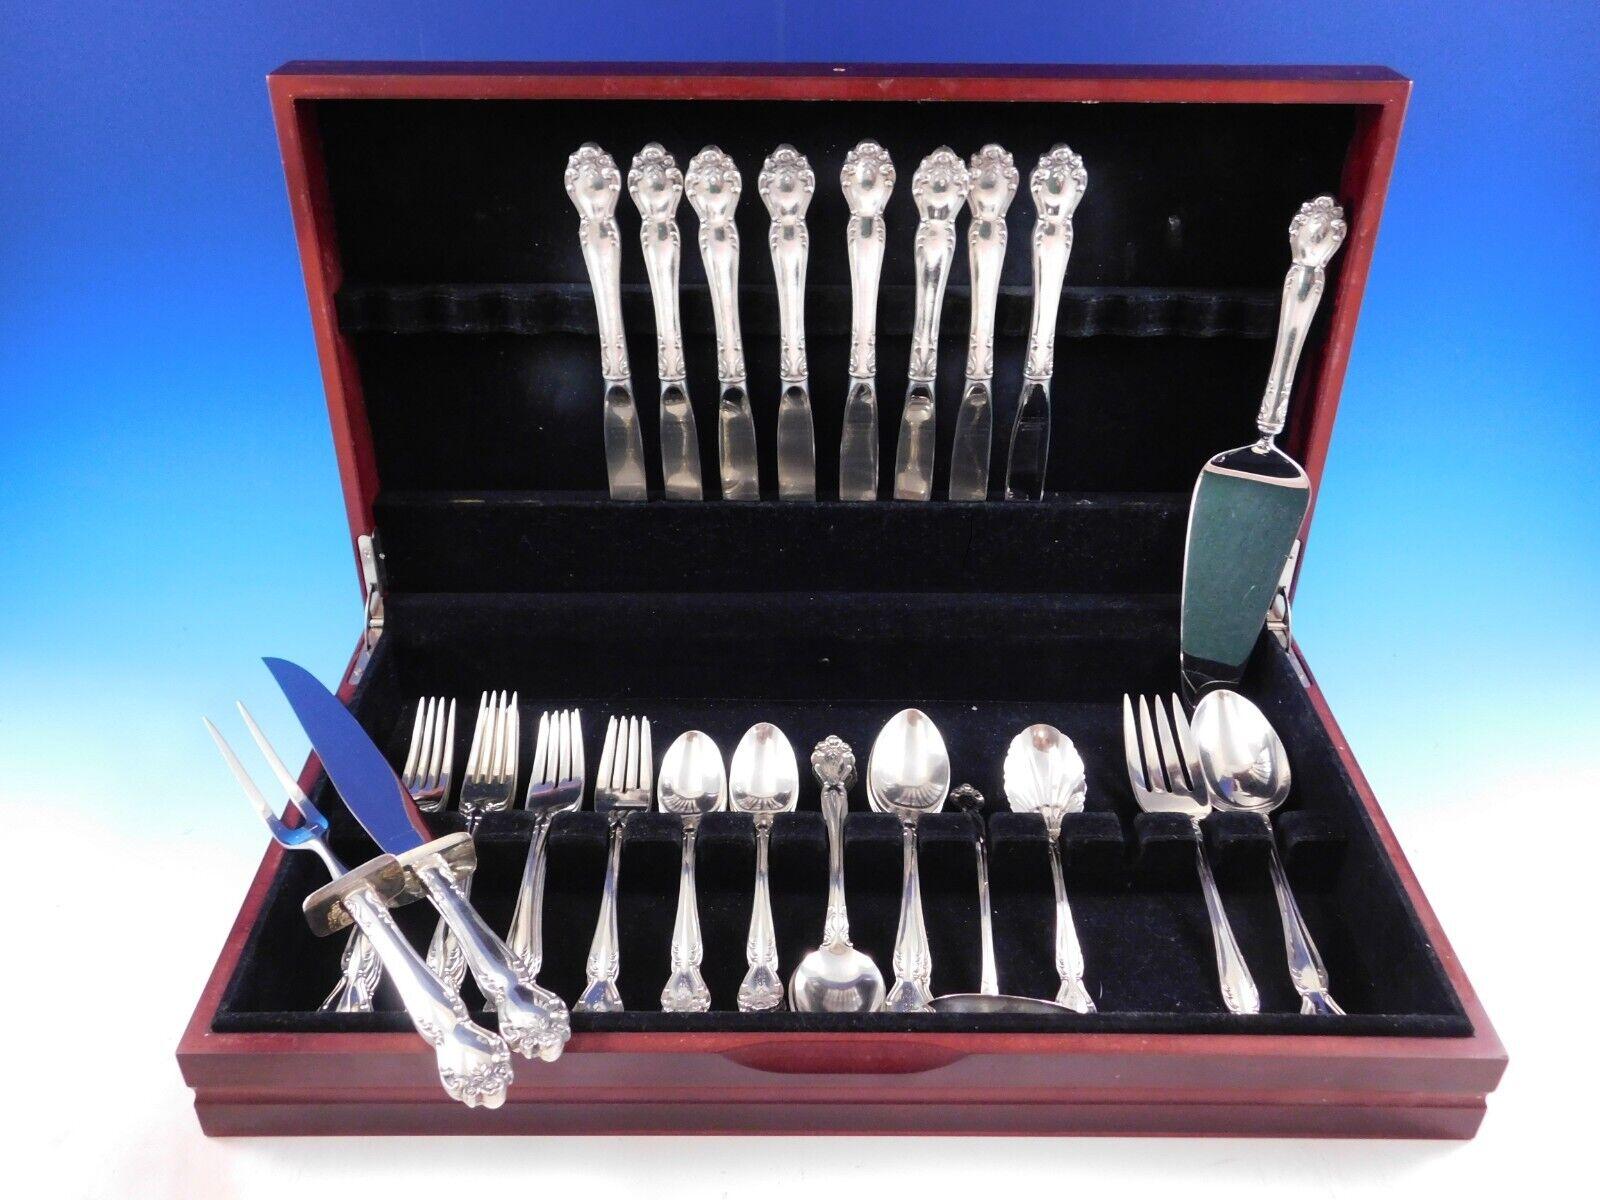 Secret Garden by Gorham sterling silver Flatware set, 47 pieces. This service includes:

8 Knives, 9 1/4